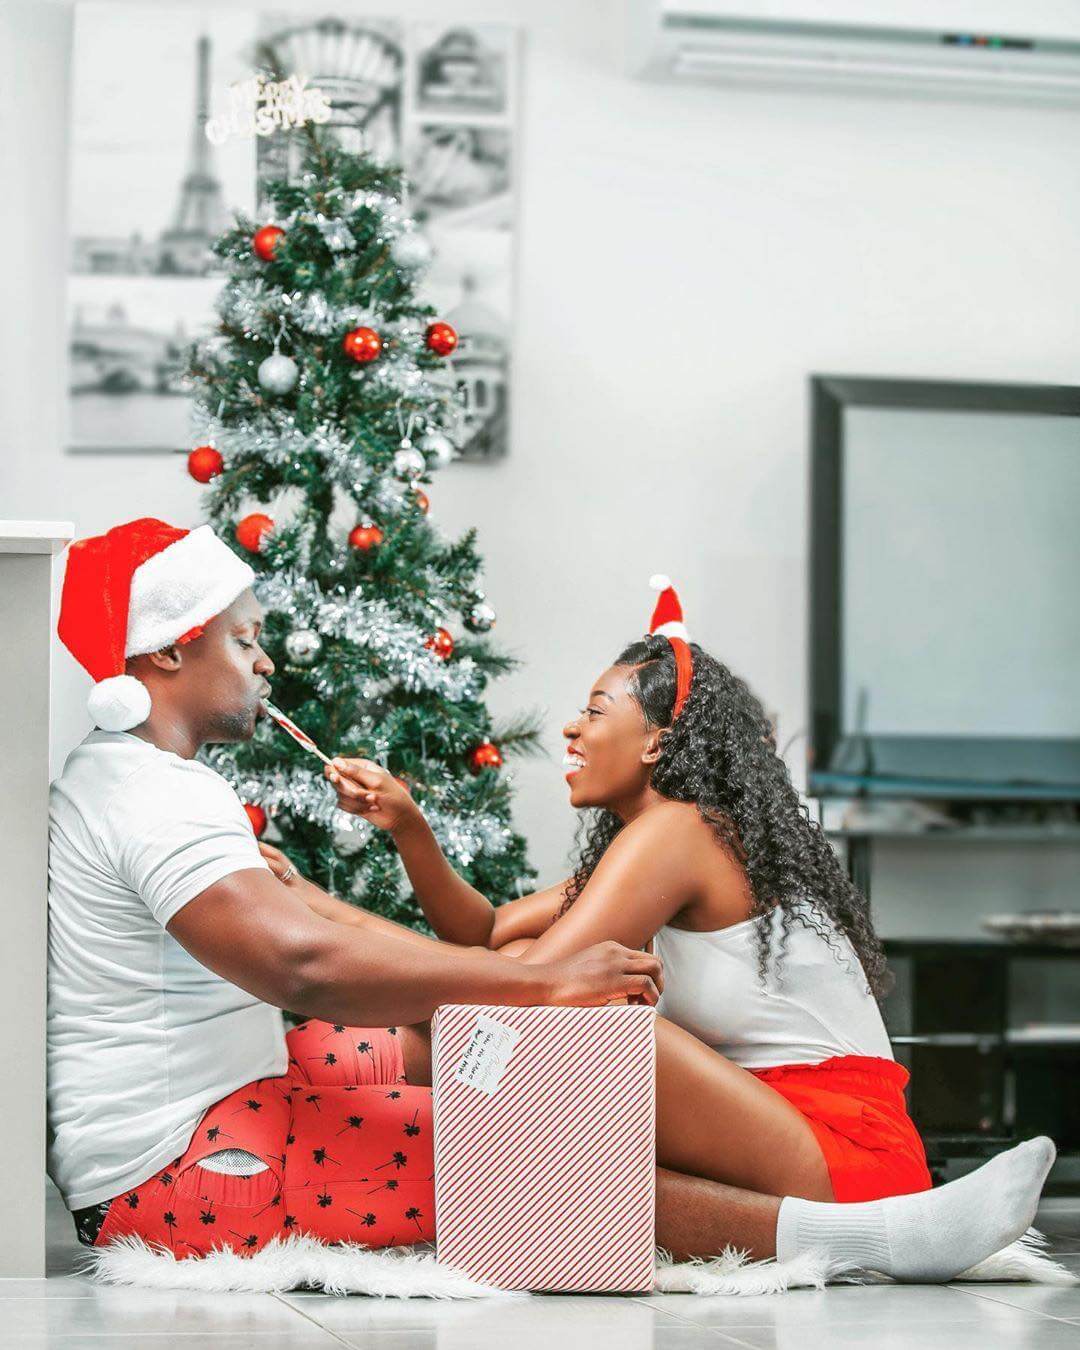 Christmas Photoshoot Ideas for Couple Happy Candids With Better Half